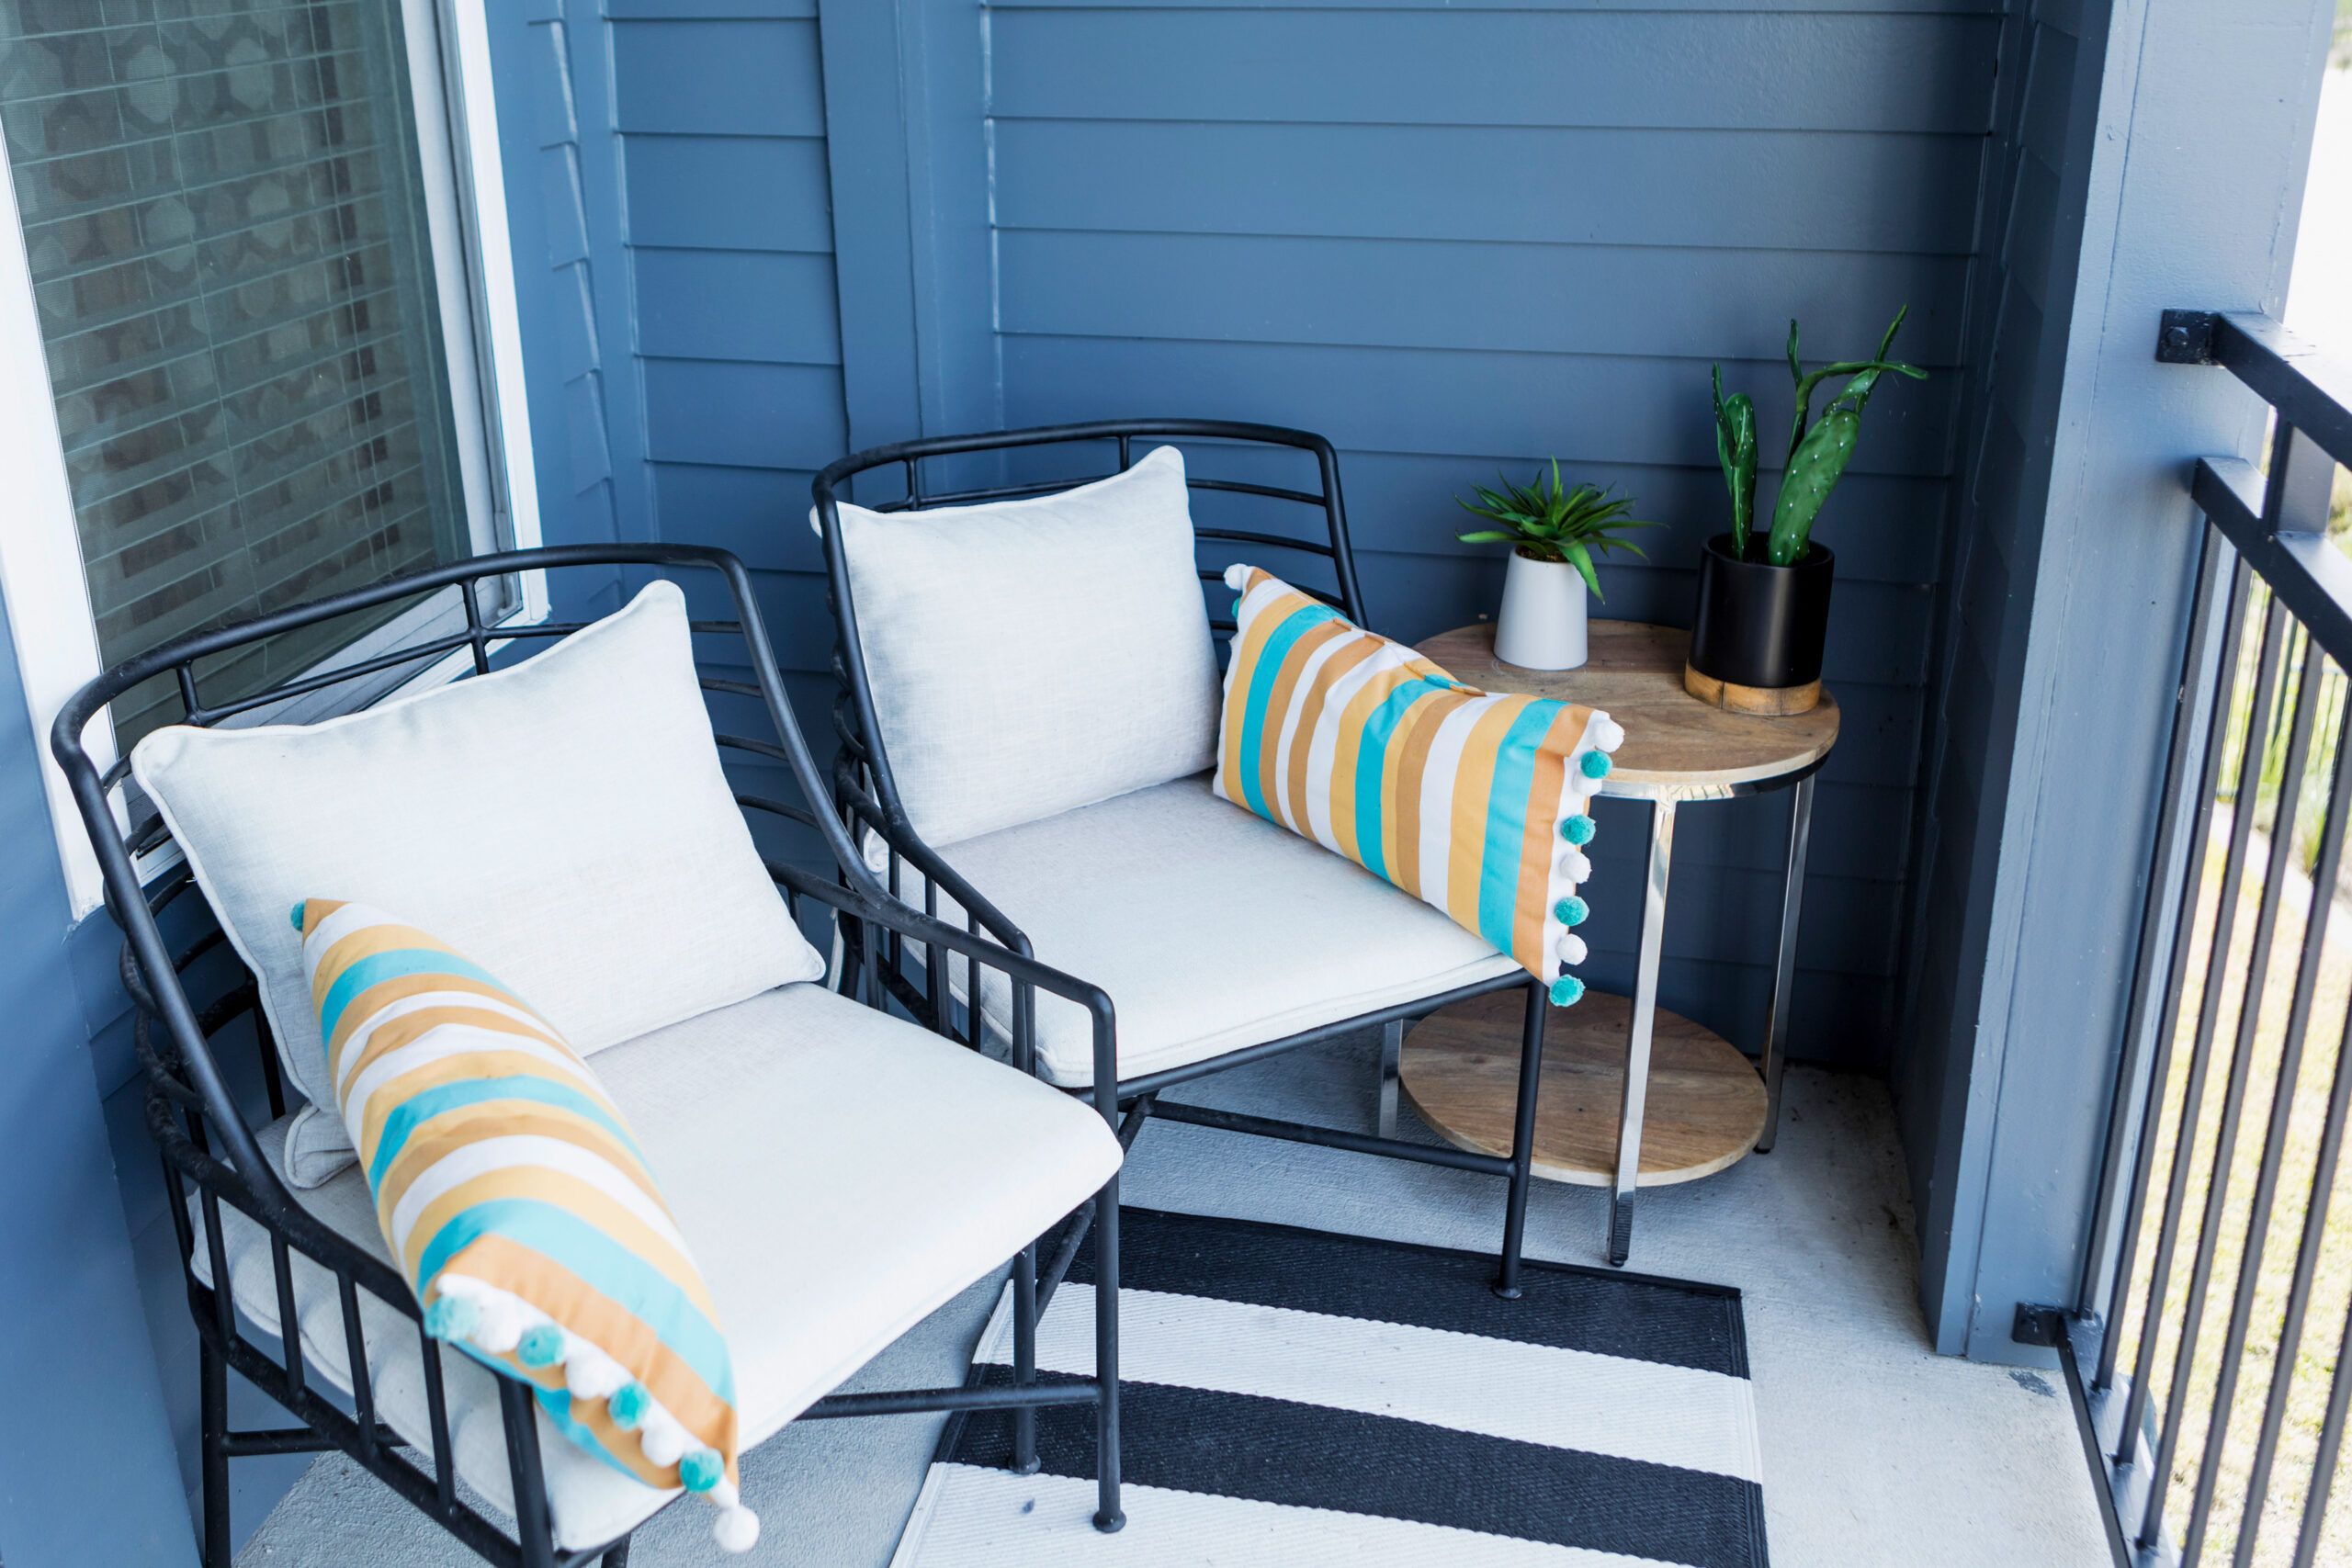 Remove Rust from Metal Outdoor Furniture: Save with Care!